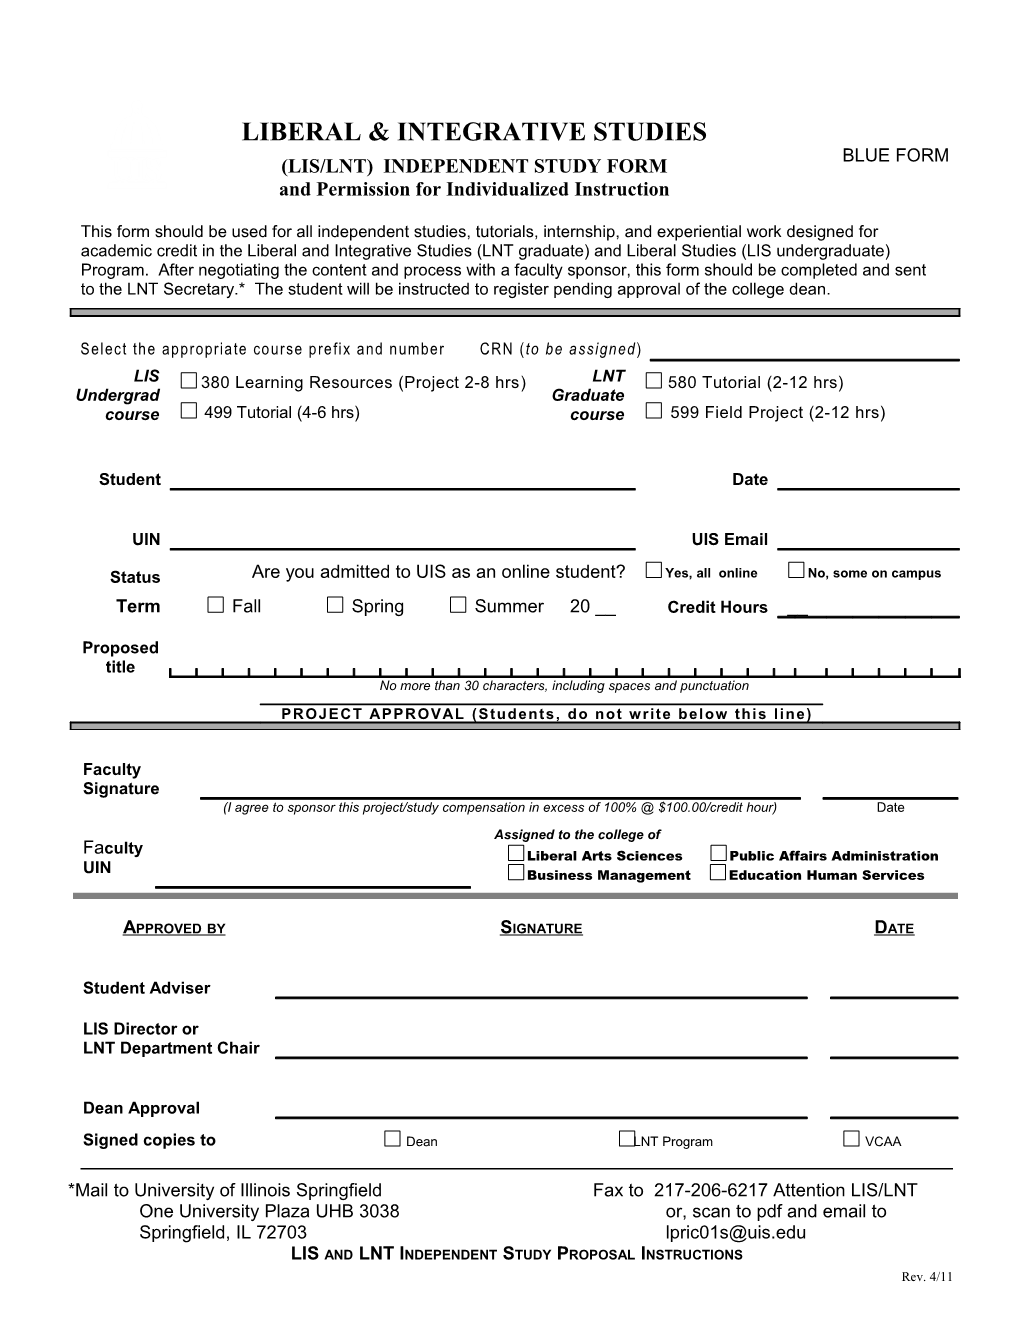 LIS Independent Study Proposal Form